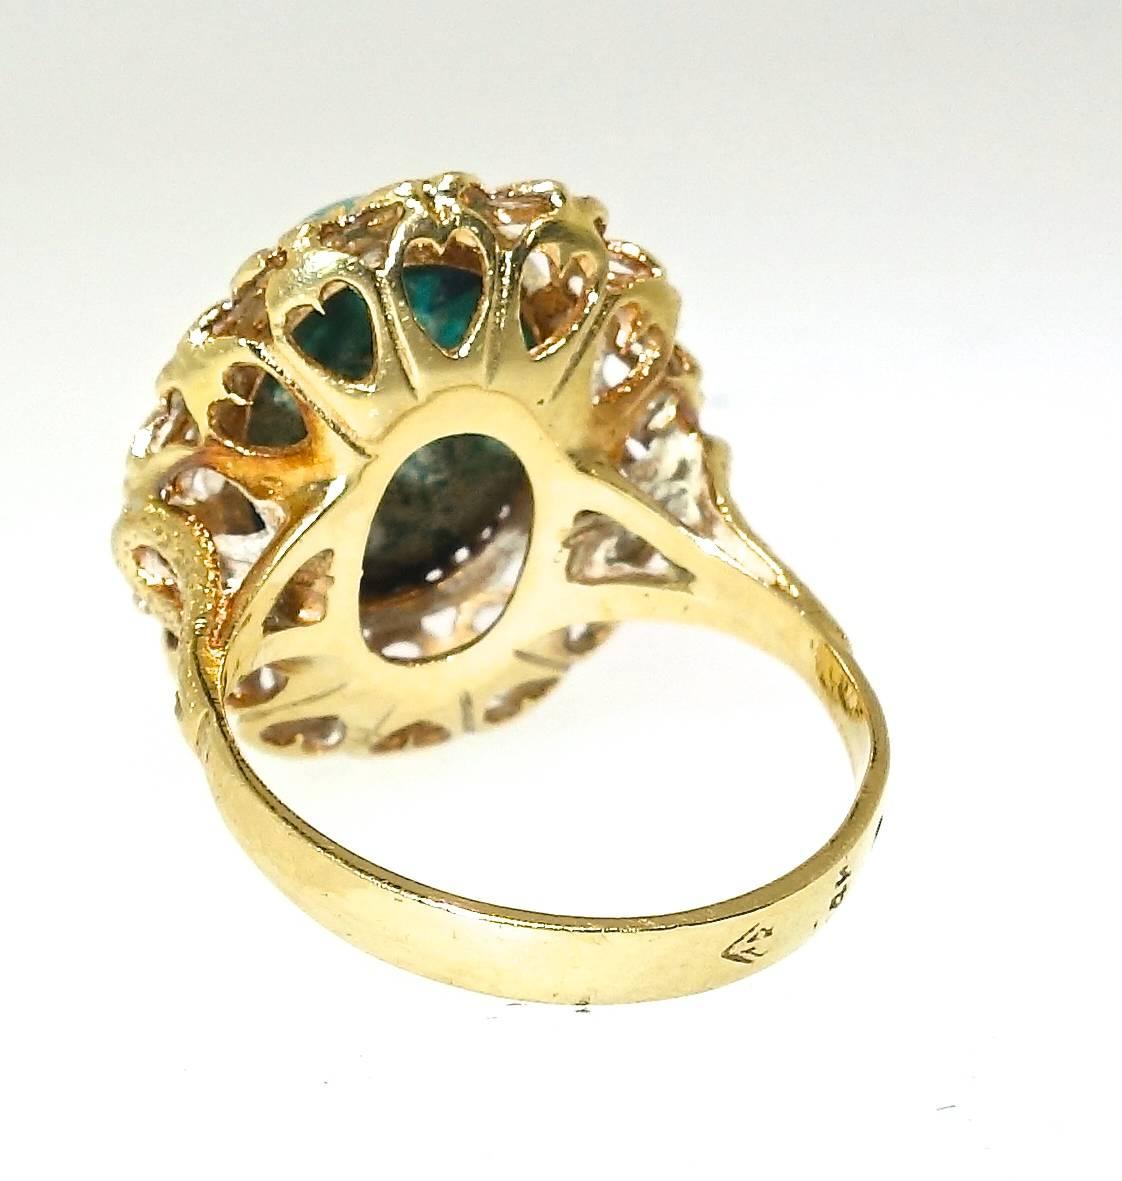 Natural Malachite, weighing approximately 5 cts., set in an ornate gold ring.  This ring weighs 5.35 grams and is now a size 6 and we can easily size it.  Note, the fine tracery work in the gallery!